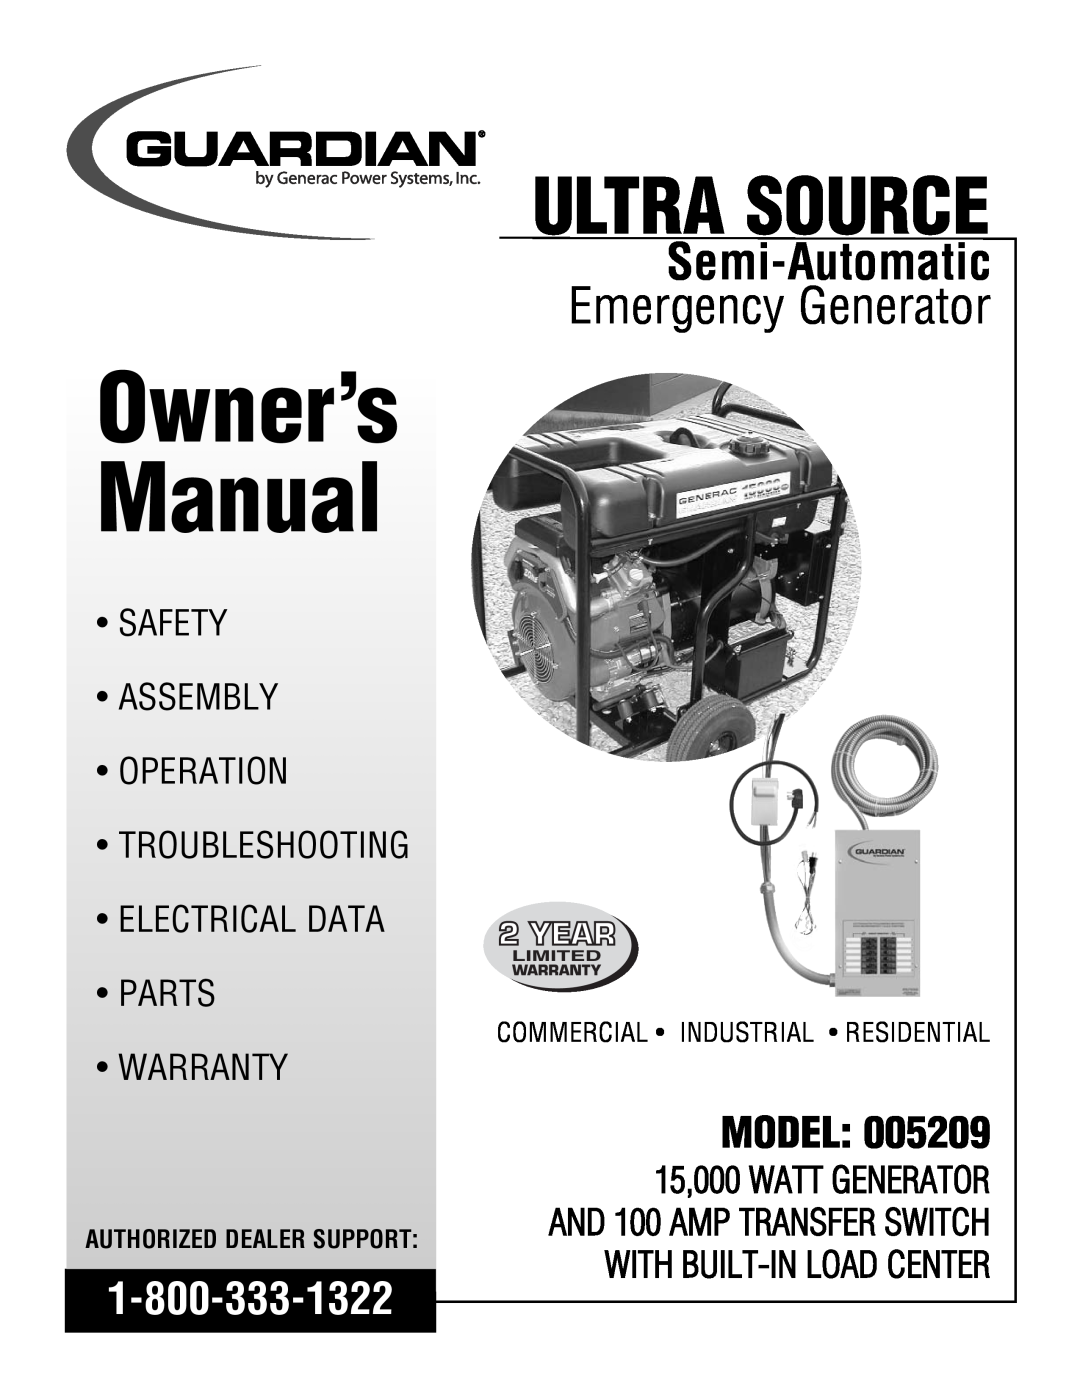 Guardian Technologies 5209 owner manual Authorized Dealer Support, Owner’s Manual, Ultra Source, Semi-Automatic, Model 